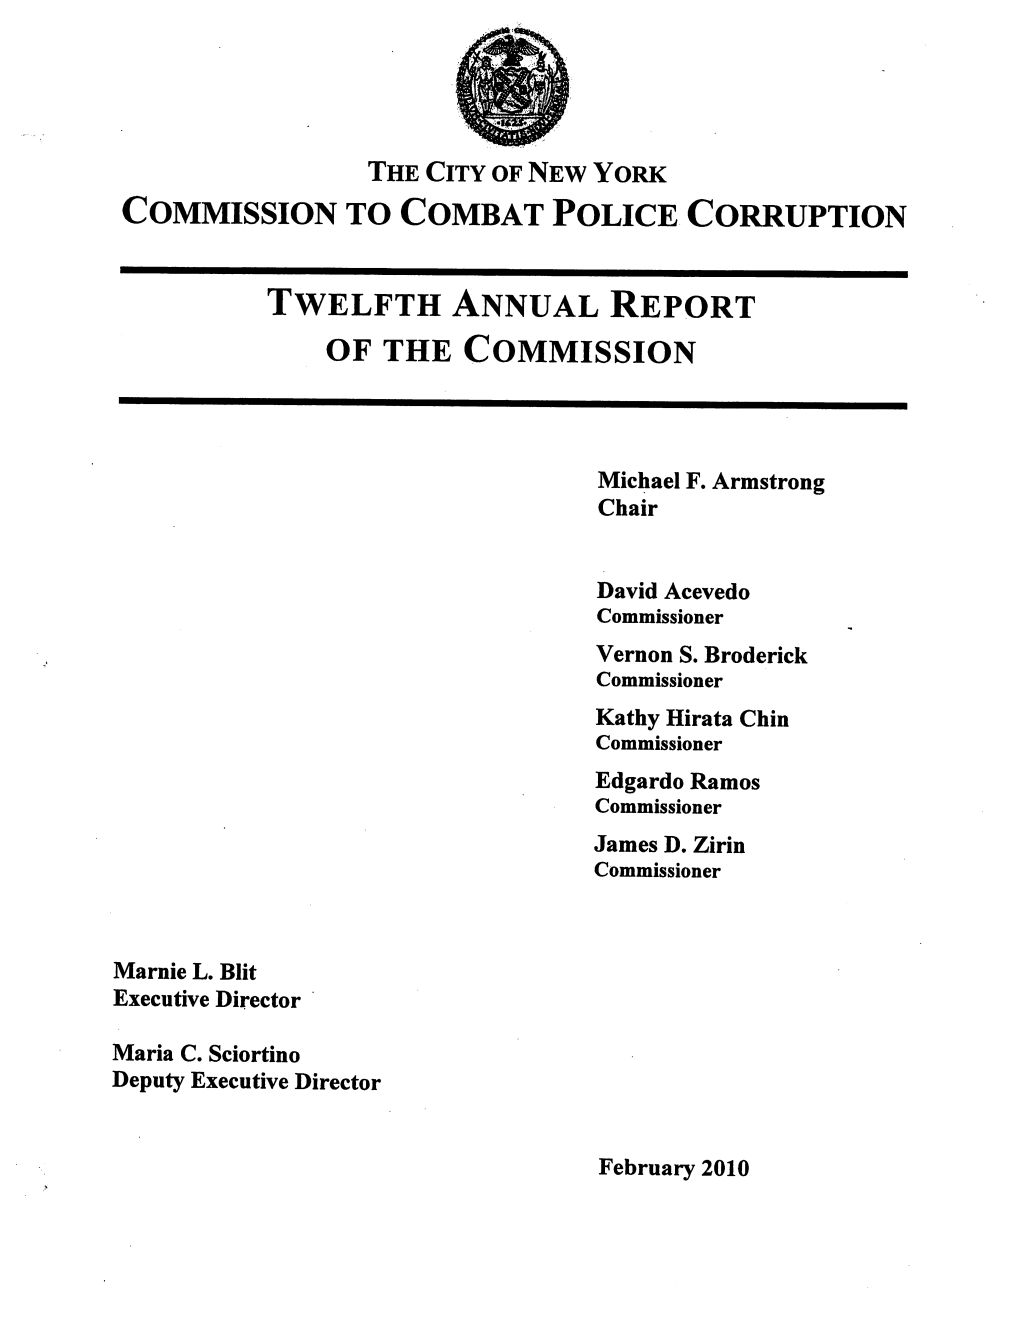 Twelfth Annual Report of the Commission